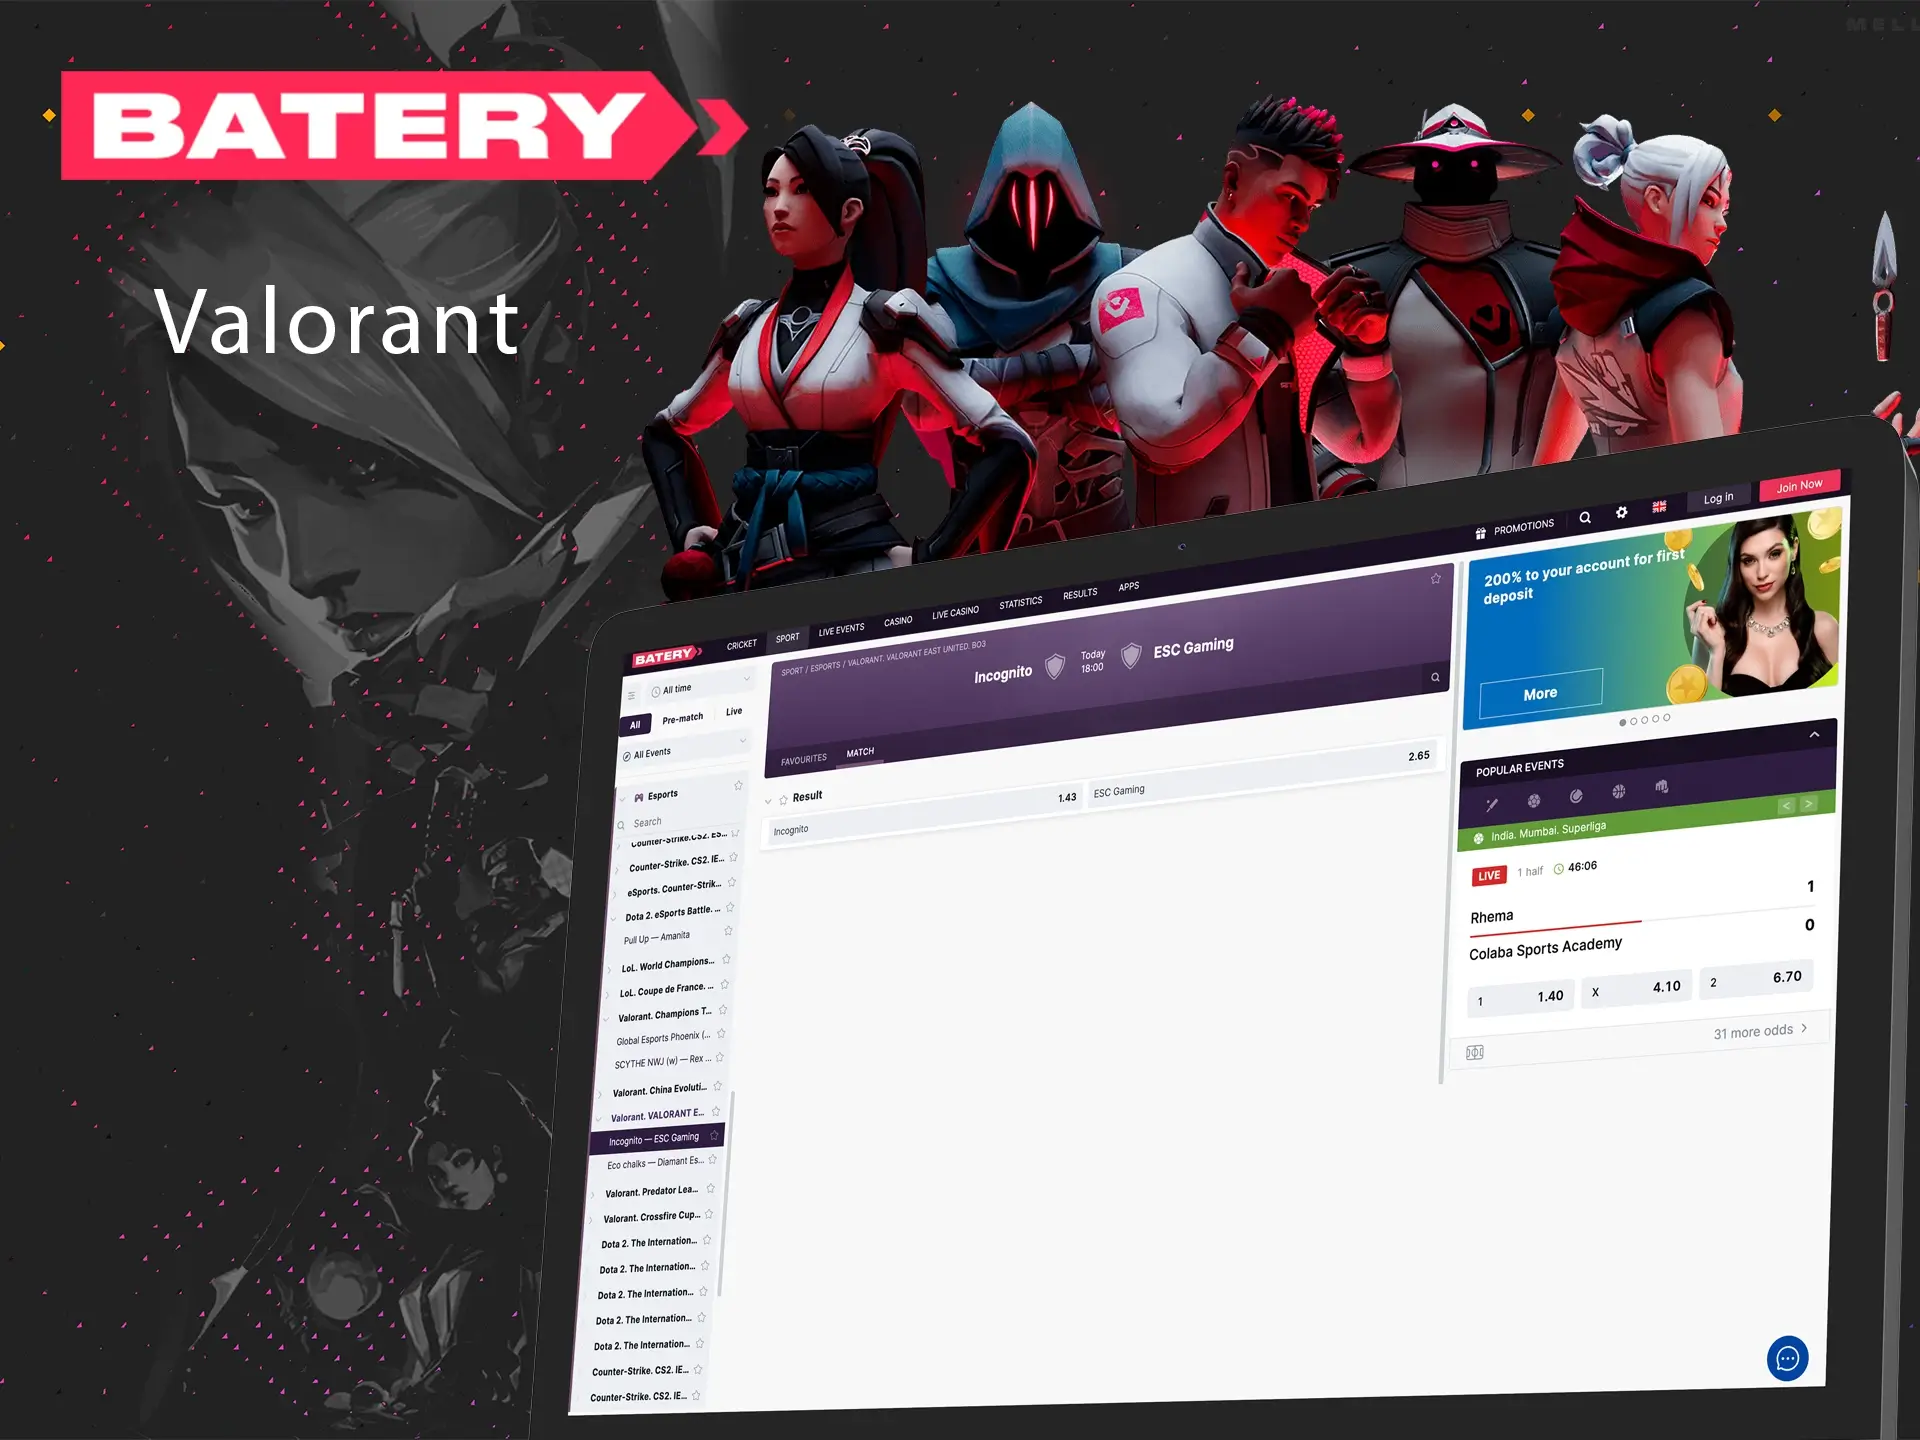 Valorant is very similar to cs:go but with one difference, in the game each character has its own specific abilities.